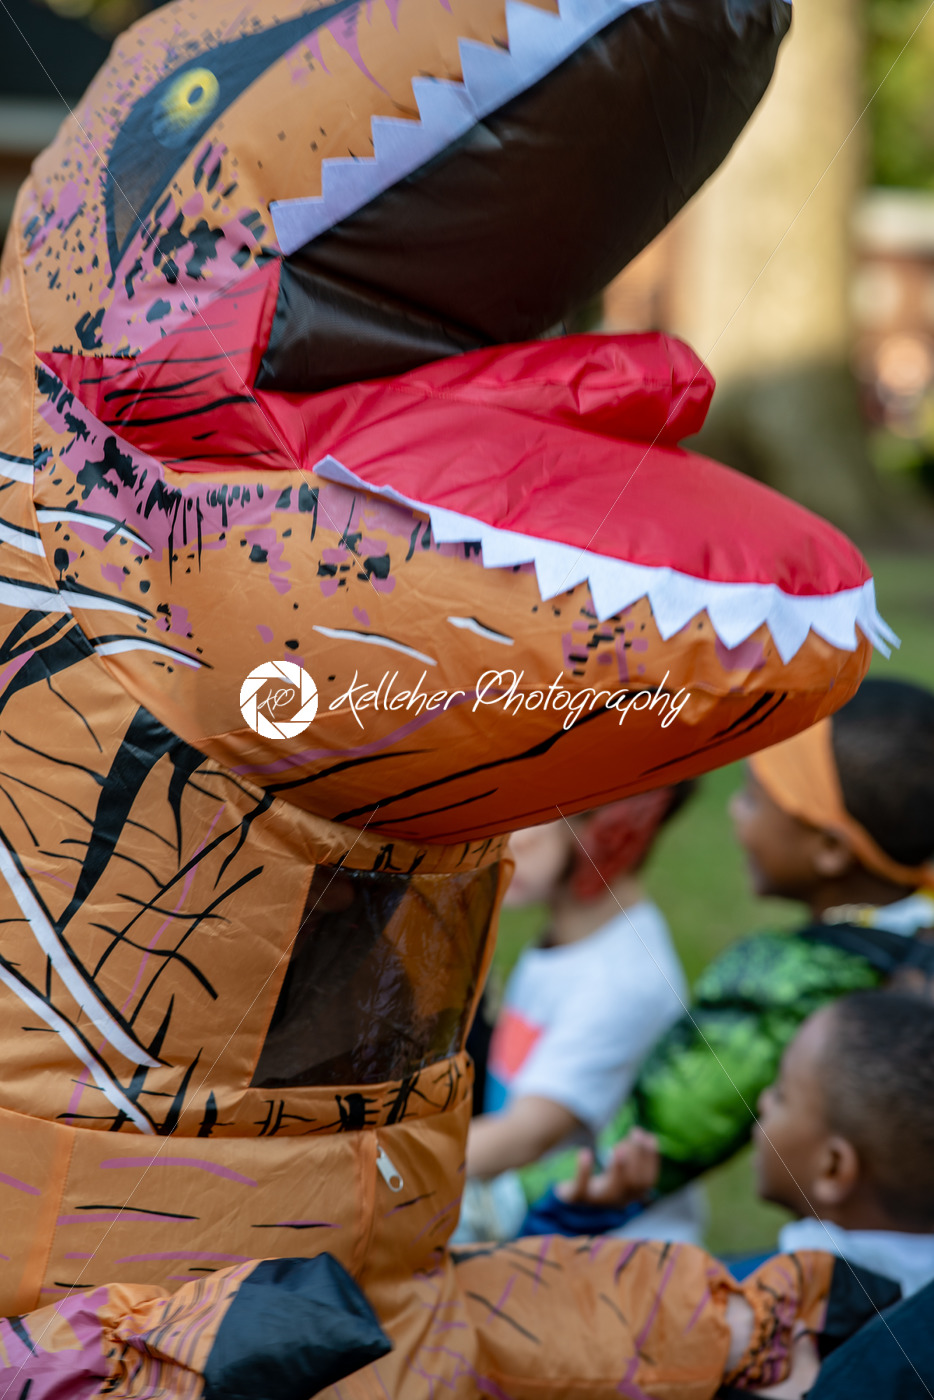 HAVERFORD, PA – OCTOBER 31, 2018 – The Haverford School Halloween Parade - Kelleher Photography Store